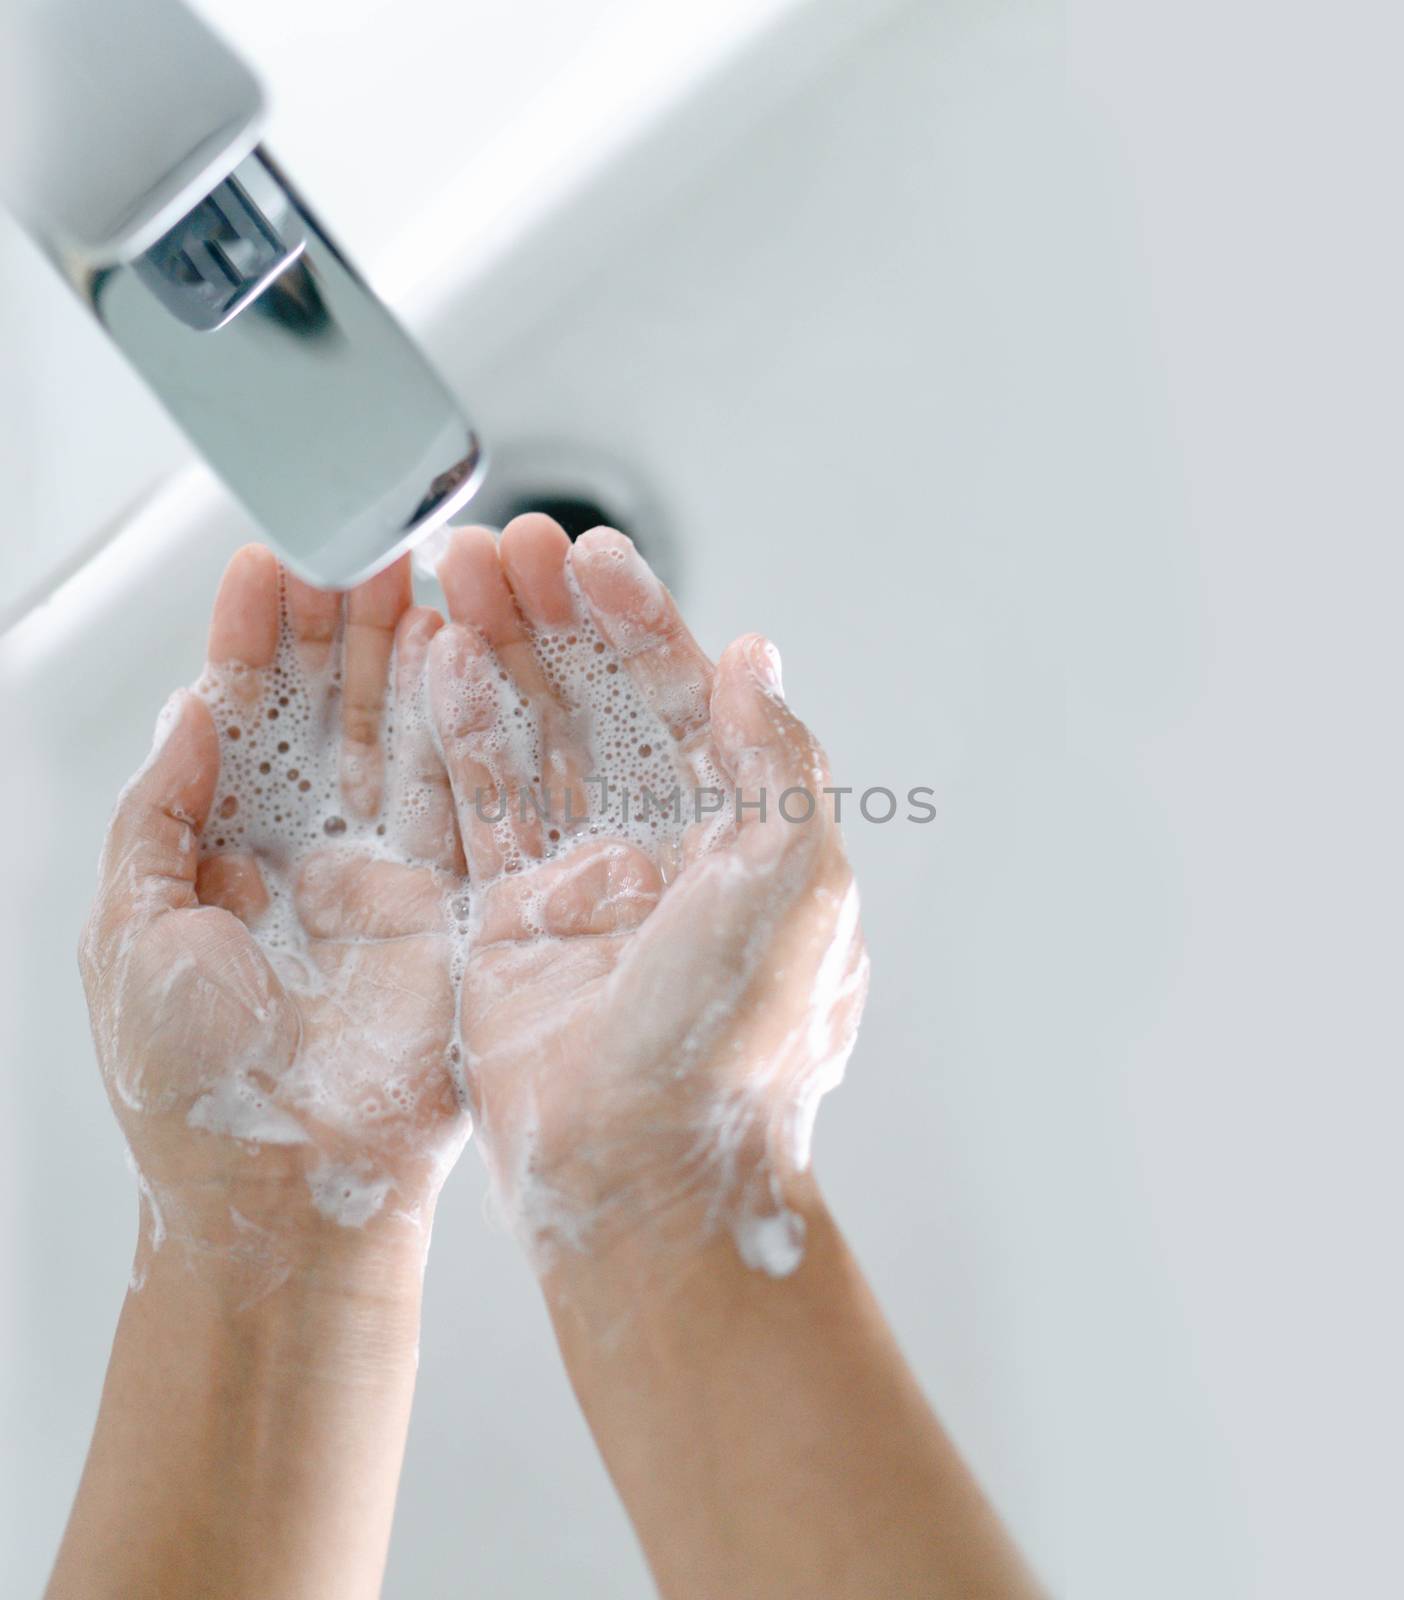 Closeup woman's hand washing with soap in bathroom, selective fo by pt.pongsak@gmail.com